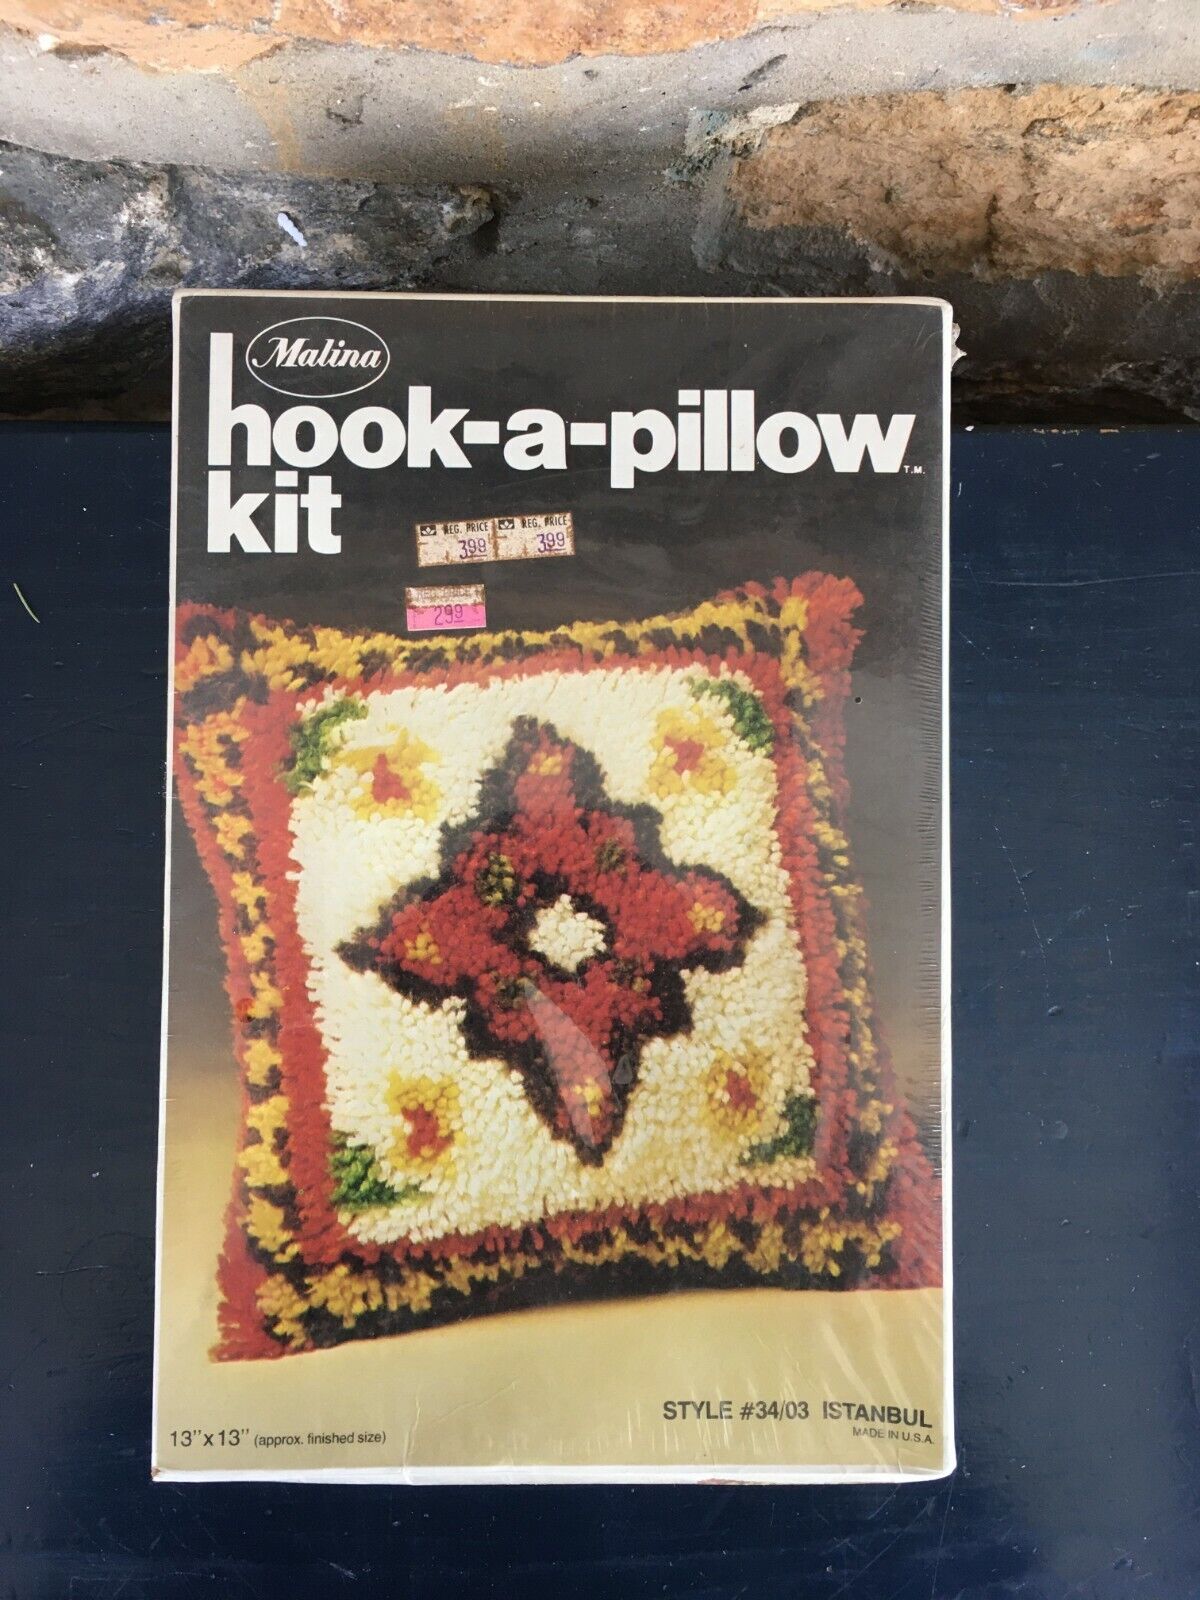 NEW Vintage Malina Hook-a-Pillow Istanbul Sales results No. 1 Cheap 03 Hook #34 Kit Latch